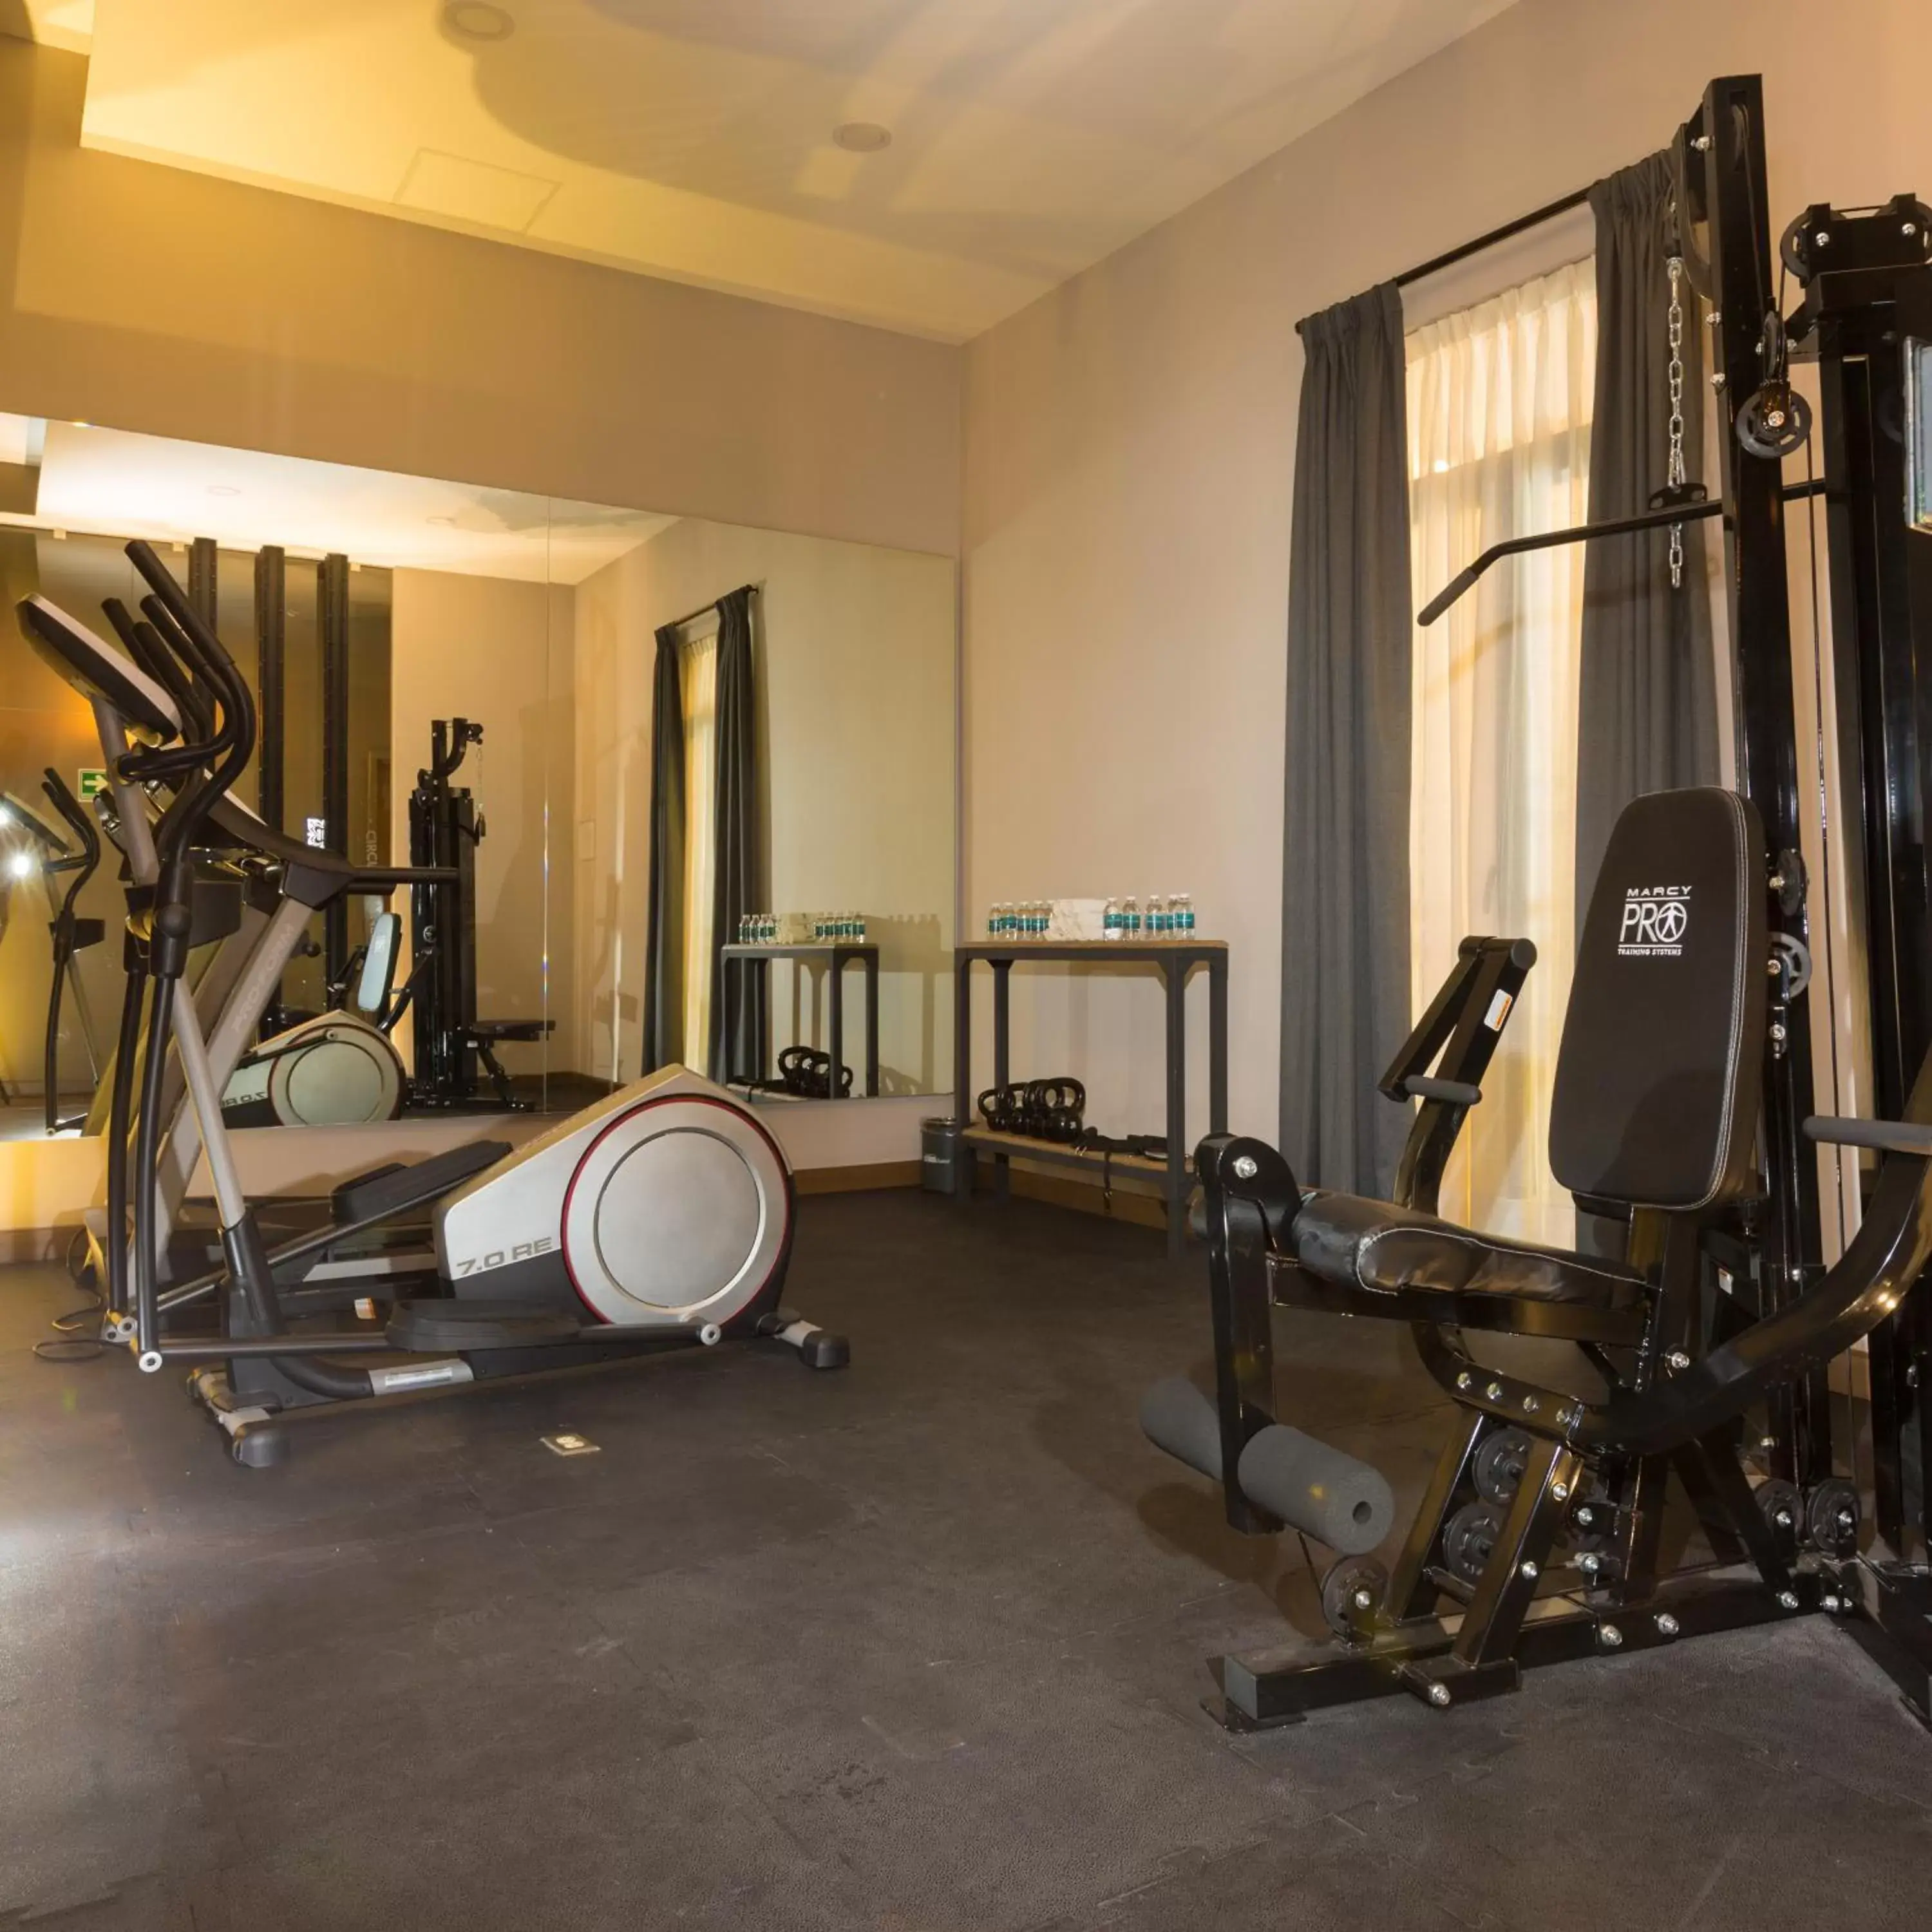 Fitness centre/facilities, Fitness Center/Facilities in Historico Central, Fine Coffee Shop & Walking tour included